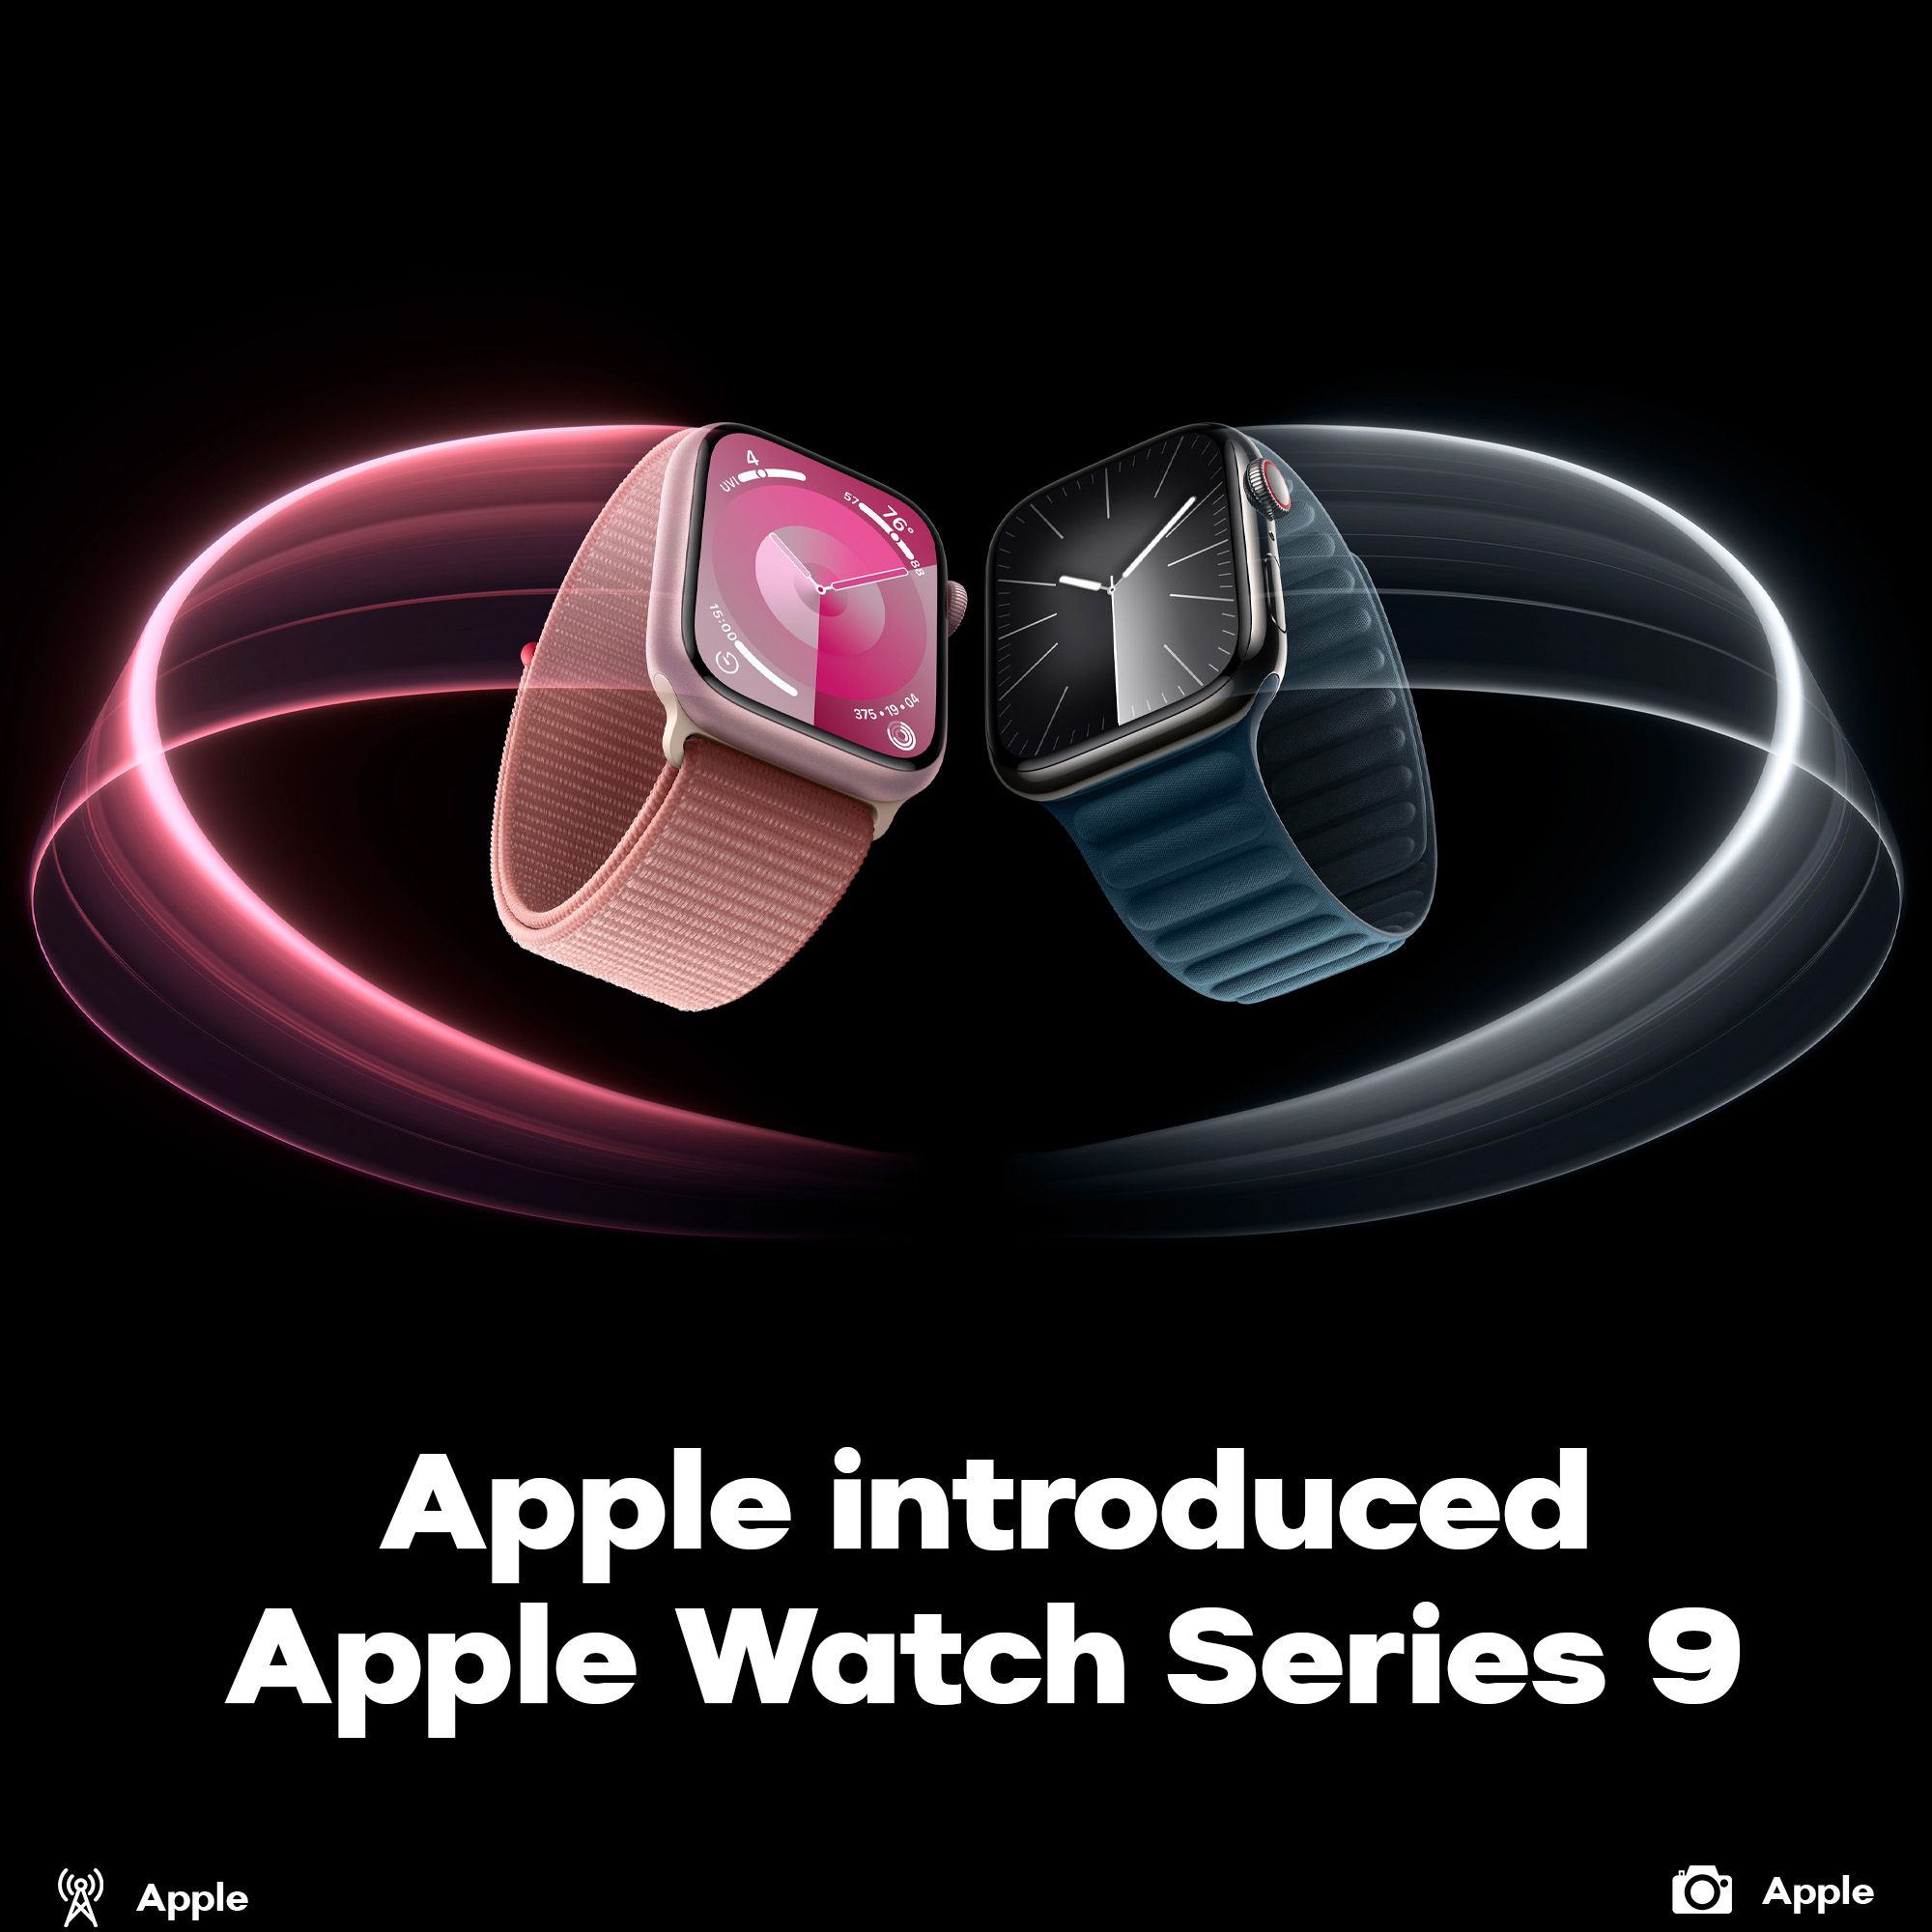 Apple Watch Series 9 introduced